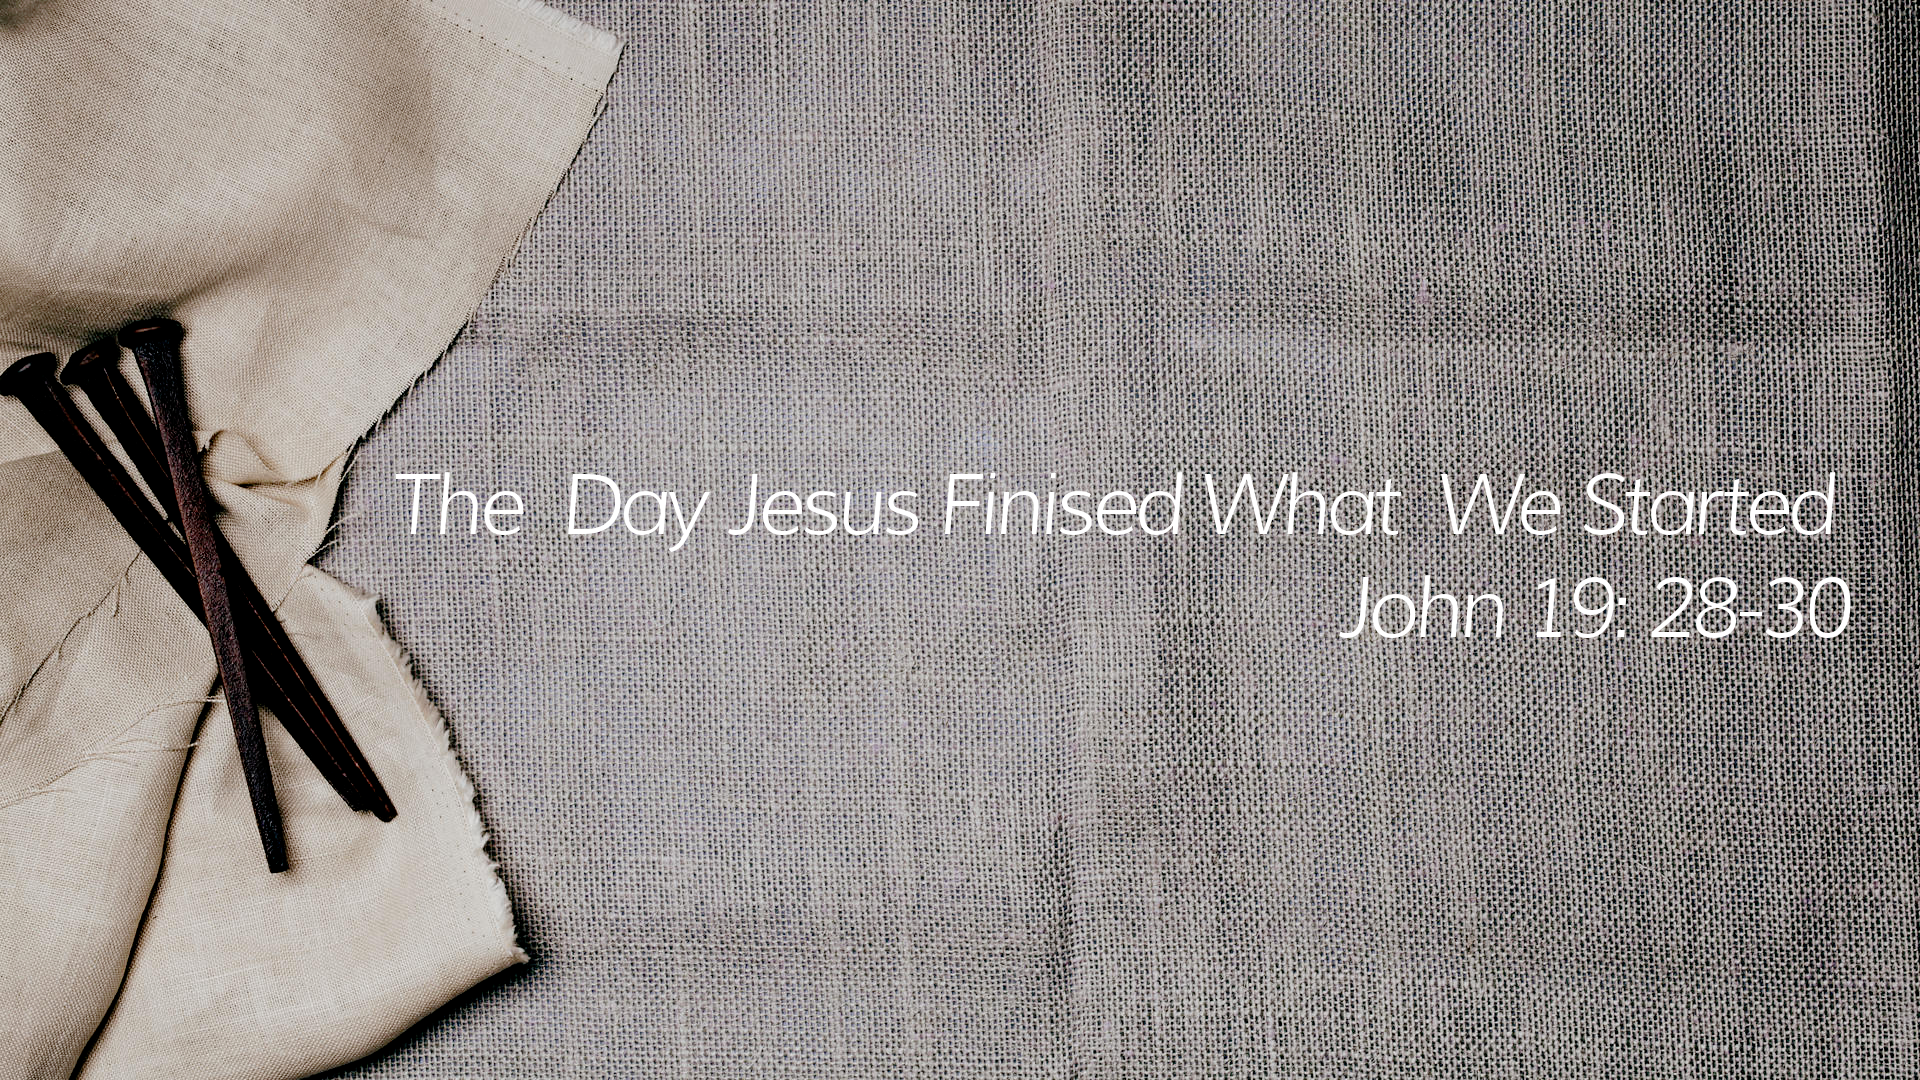 Apr 12, 2020 - The Day Jesus Finished What We Started (Video)